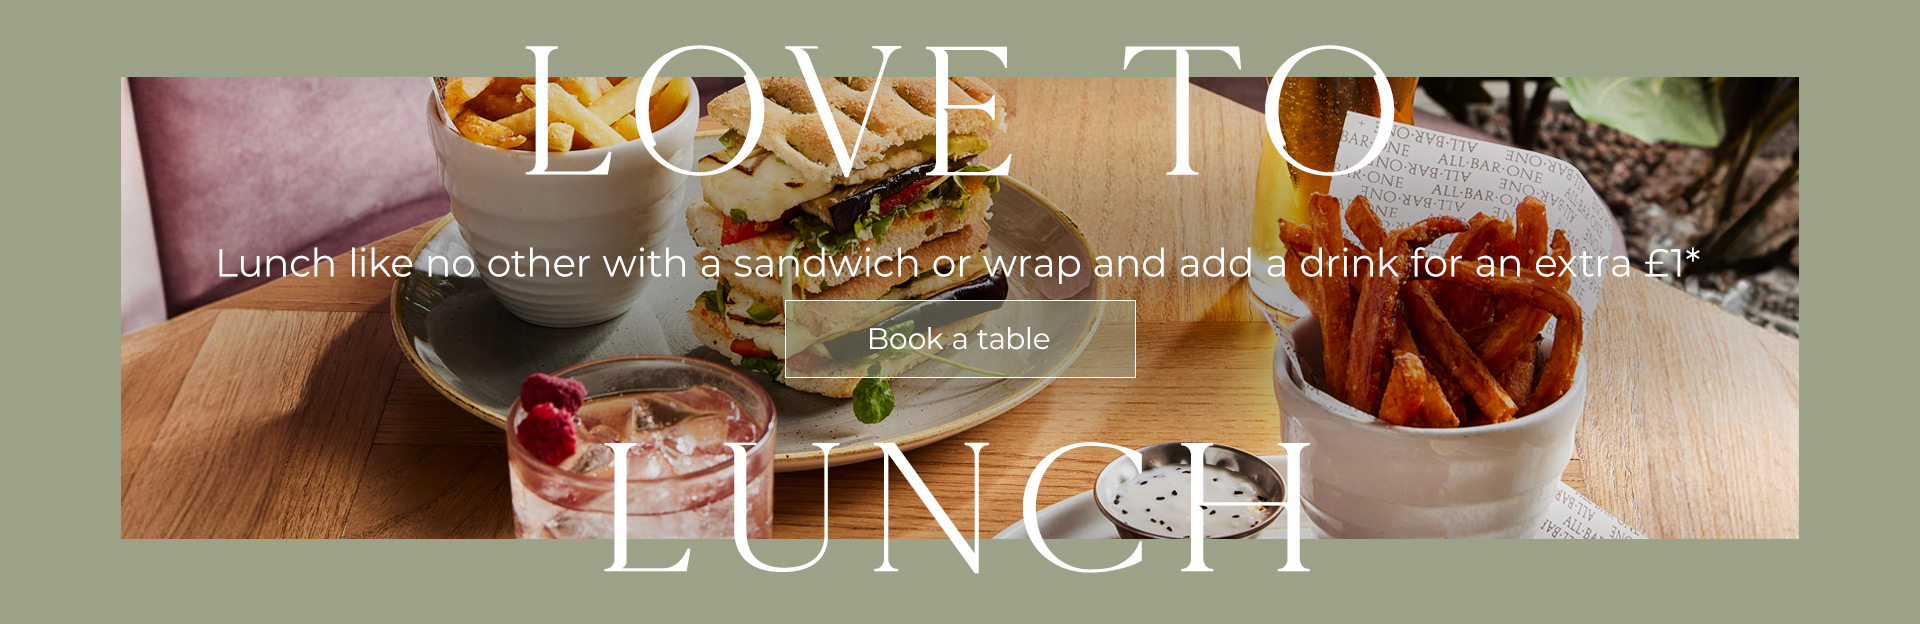 Lunch Offer at All Bar One Reading